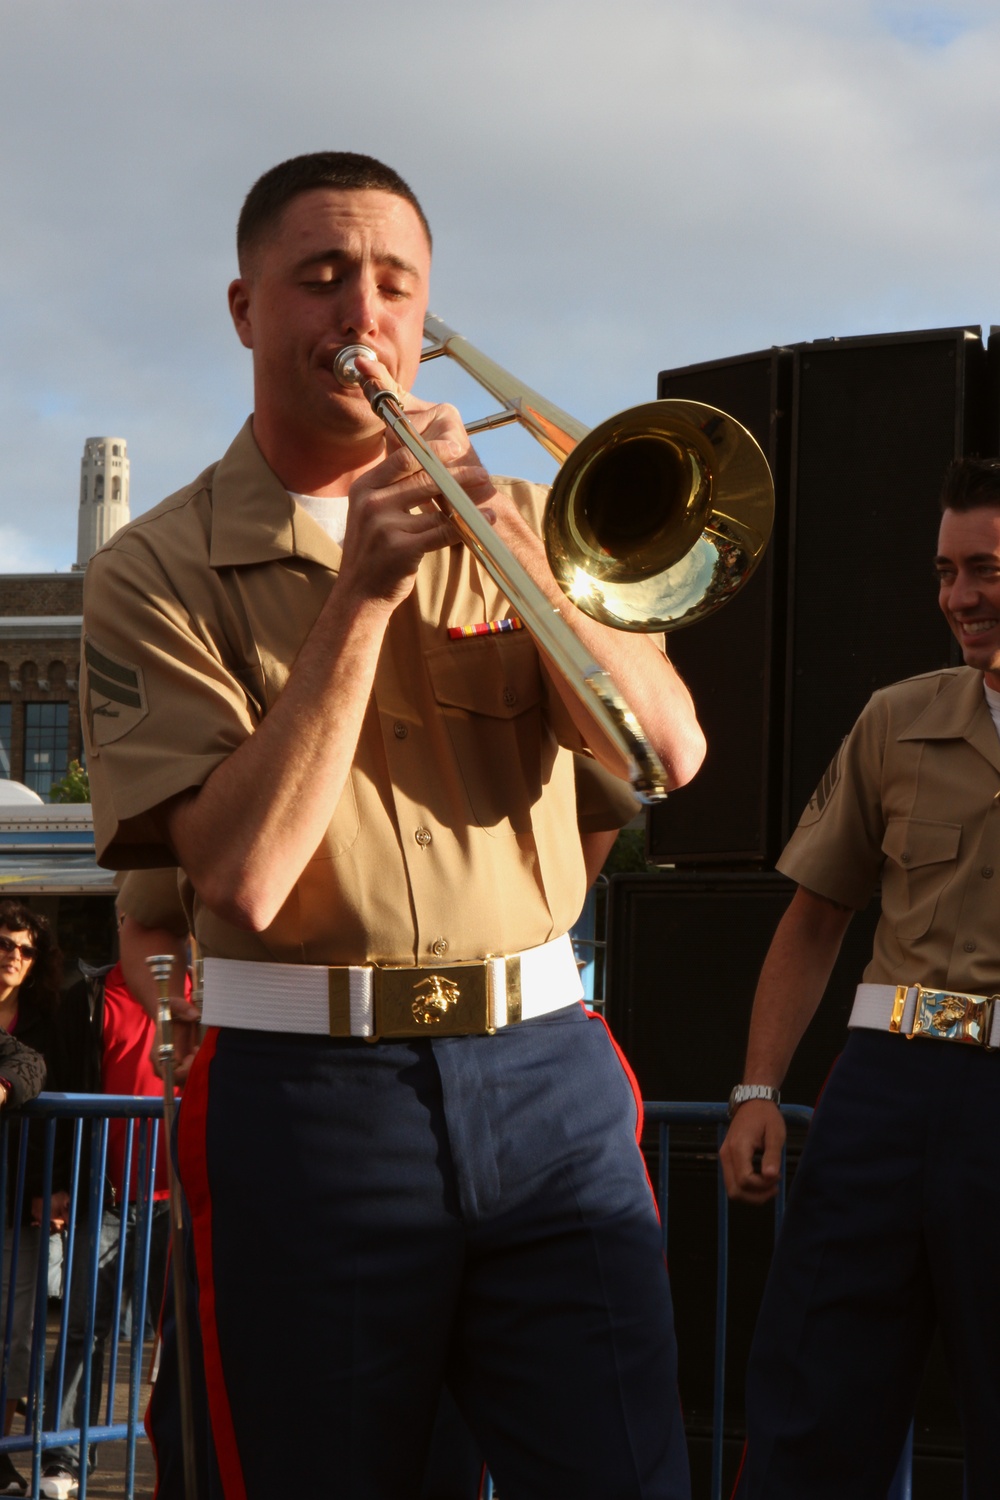 1st Marine Division Band performs at Pier 39